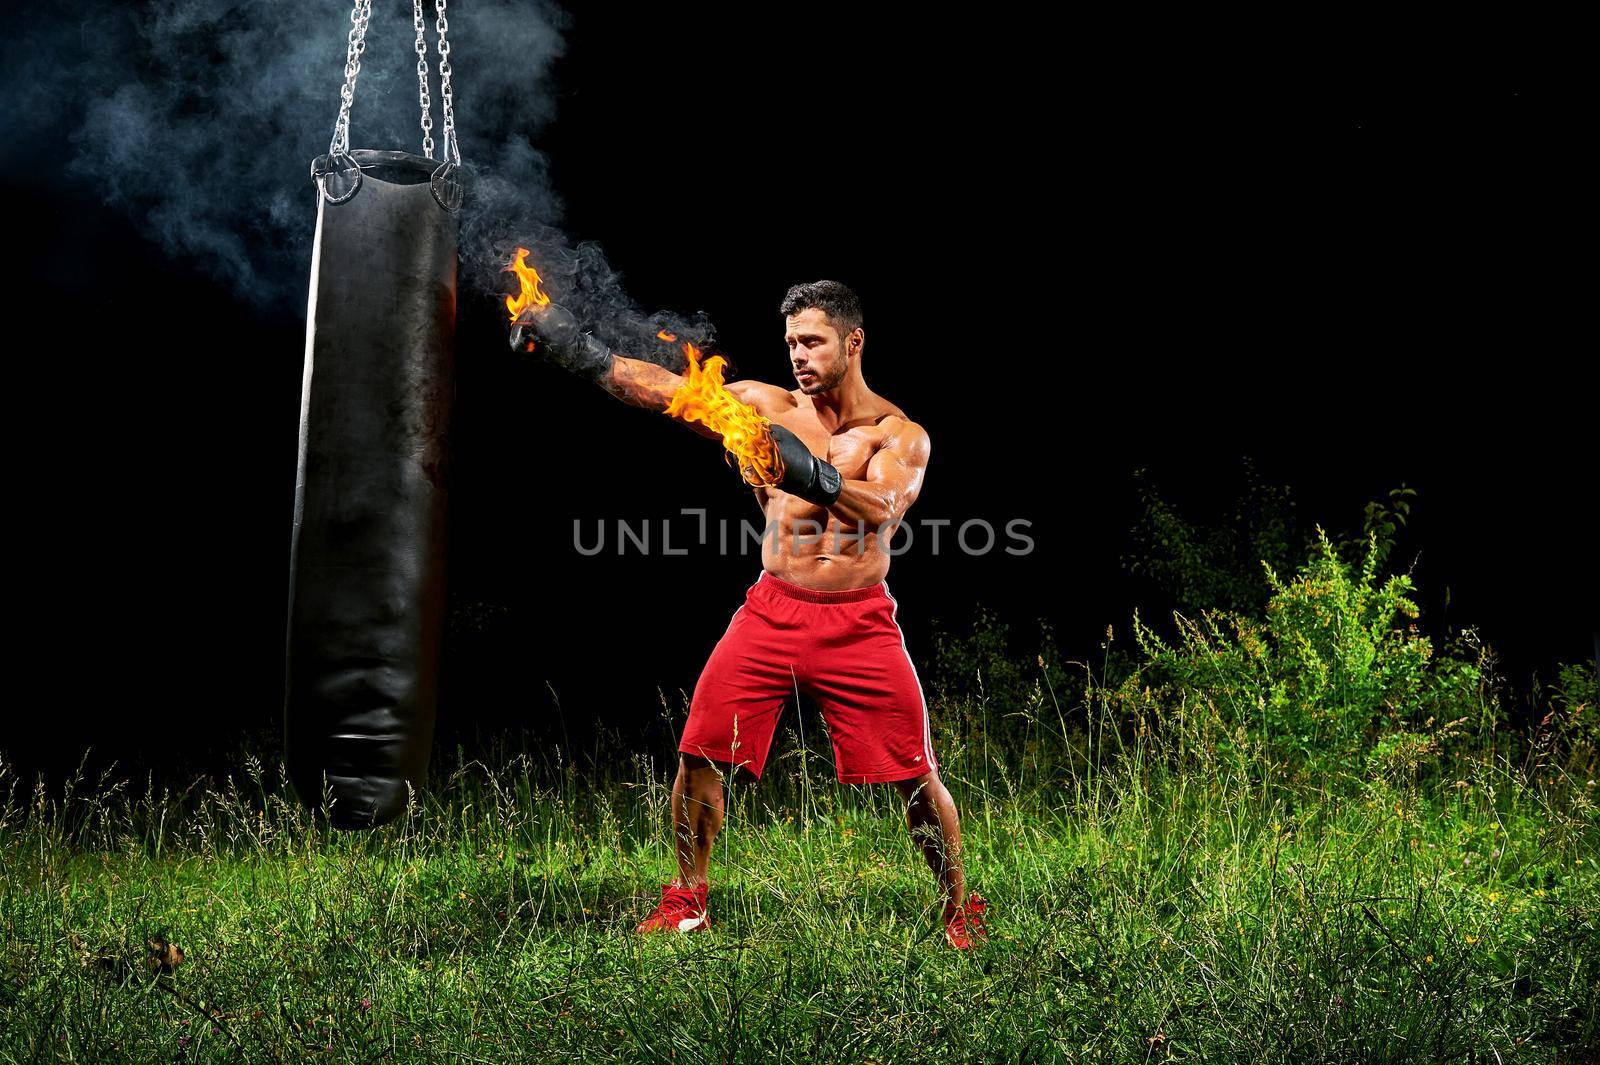 Professional boxer punching sandbag outdoors with his boxing glo by SerhiiBobyk